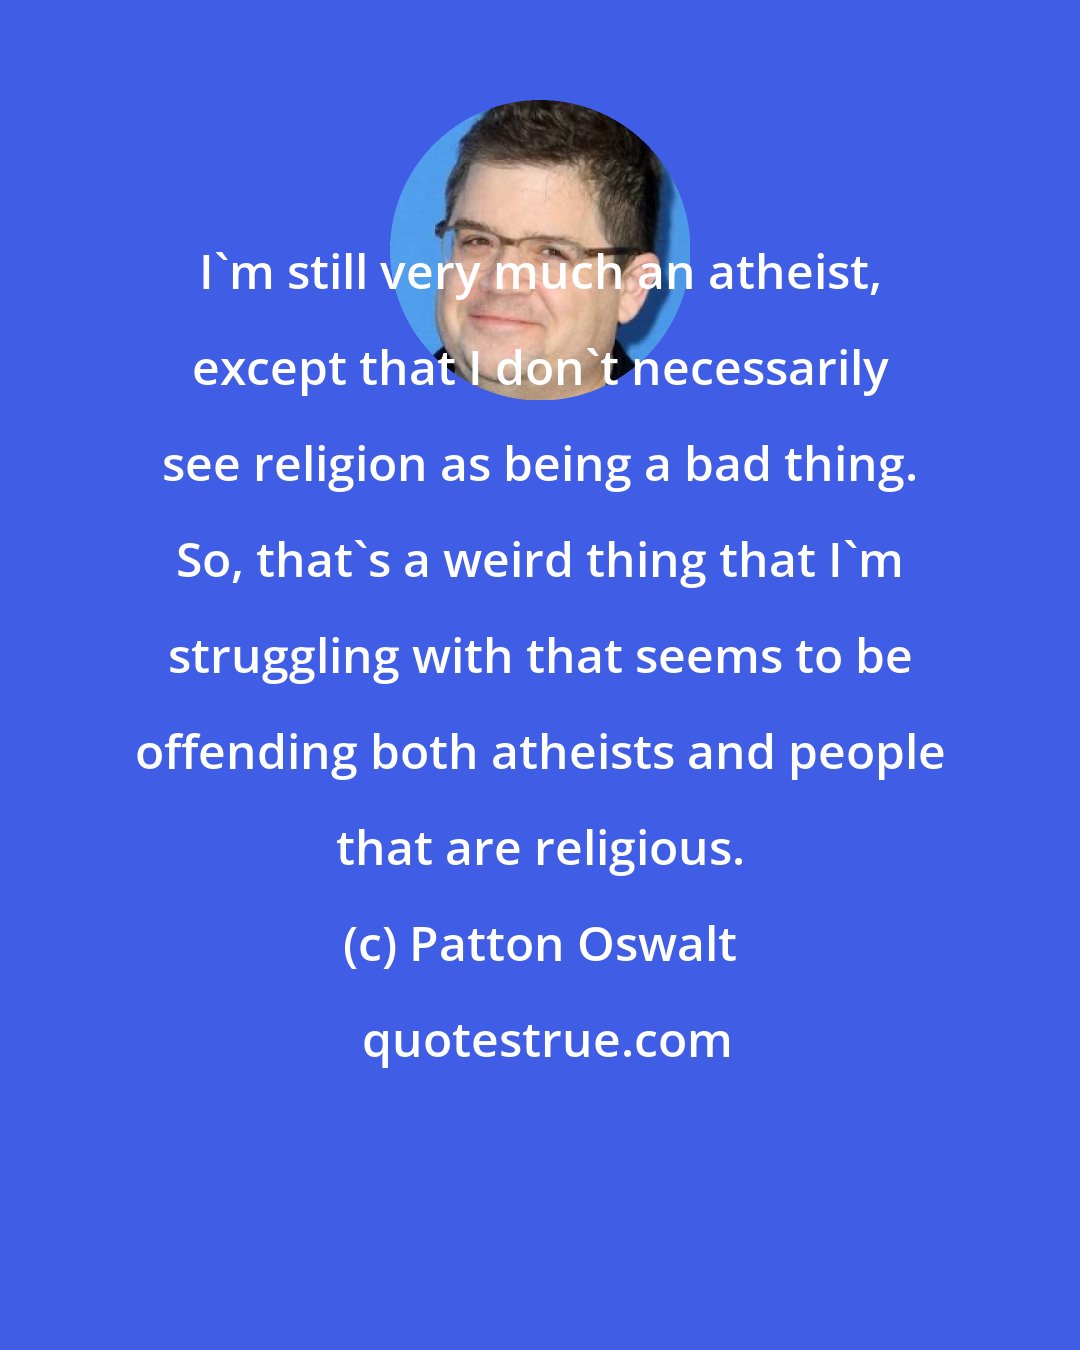 Patton Oswalt: I'm still very much an atheist, except that I don't necessarily see religion as being a bad thing. So, that's a weird thing that I'm struggling with that seems to be offending both atheists and people that are religious.